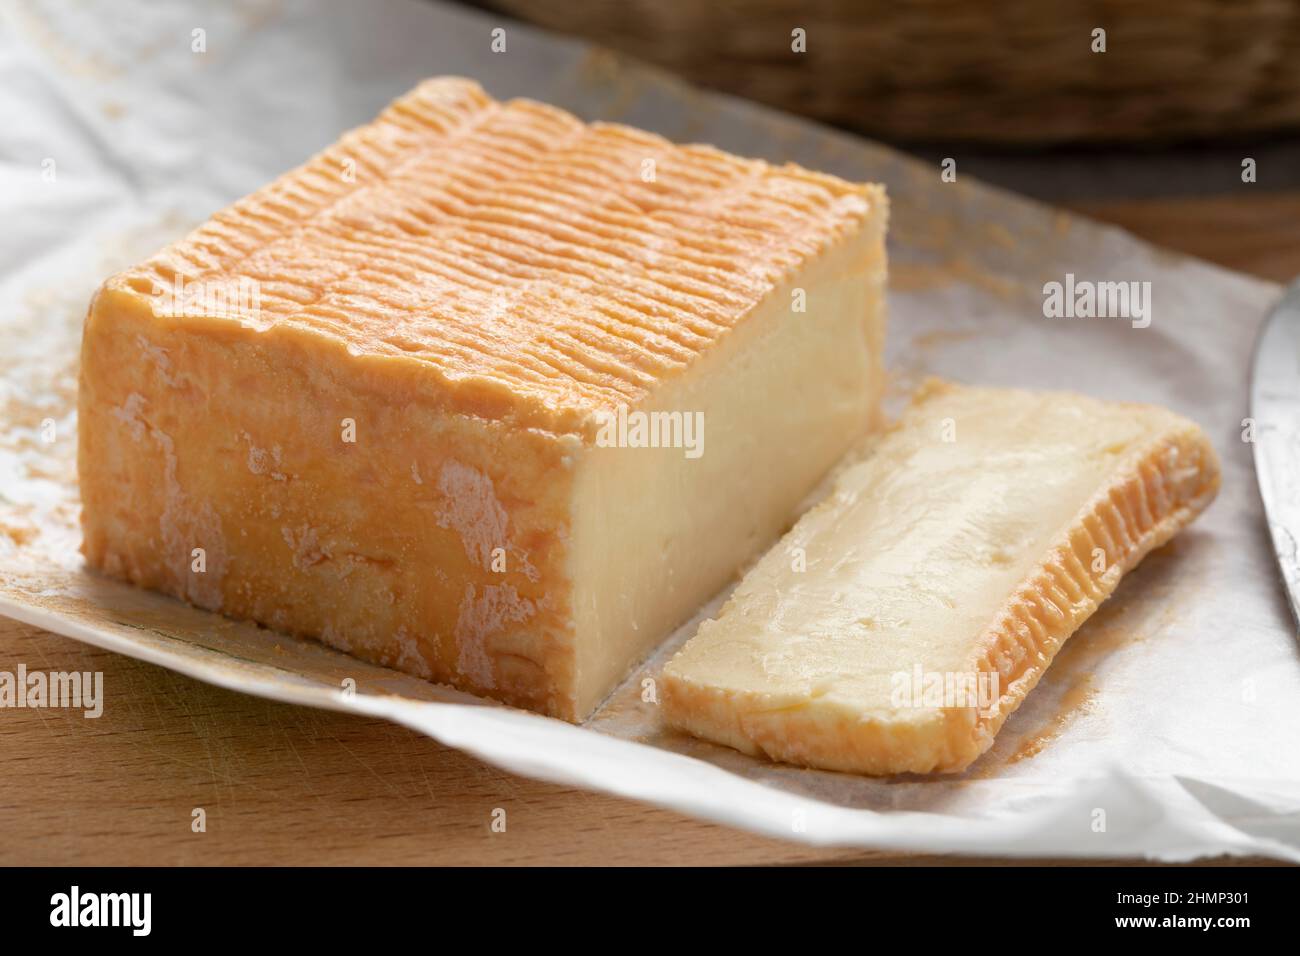 Limburger or Herve cheese and slice with a strong smell on package paper Stock Photo